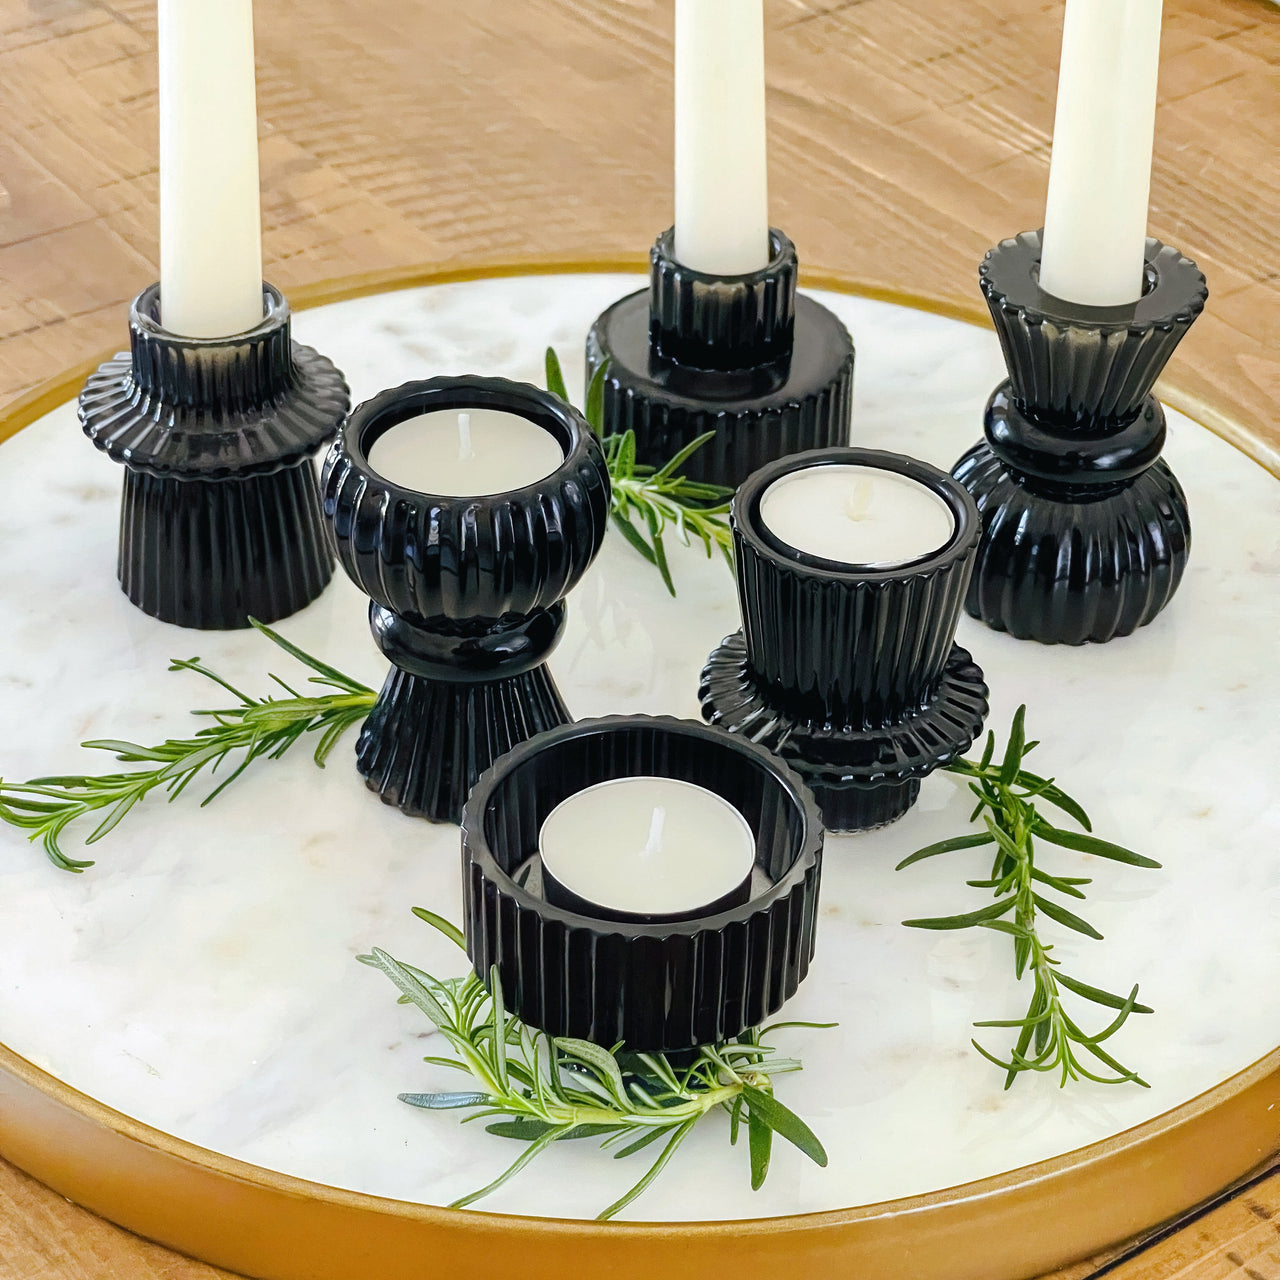 20 Piece Candle Wick Holders, 3 Hole Candle Making Fixtures